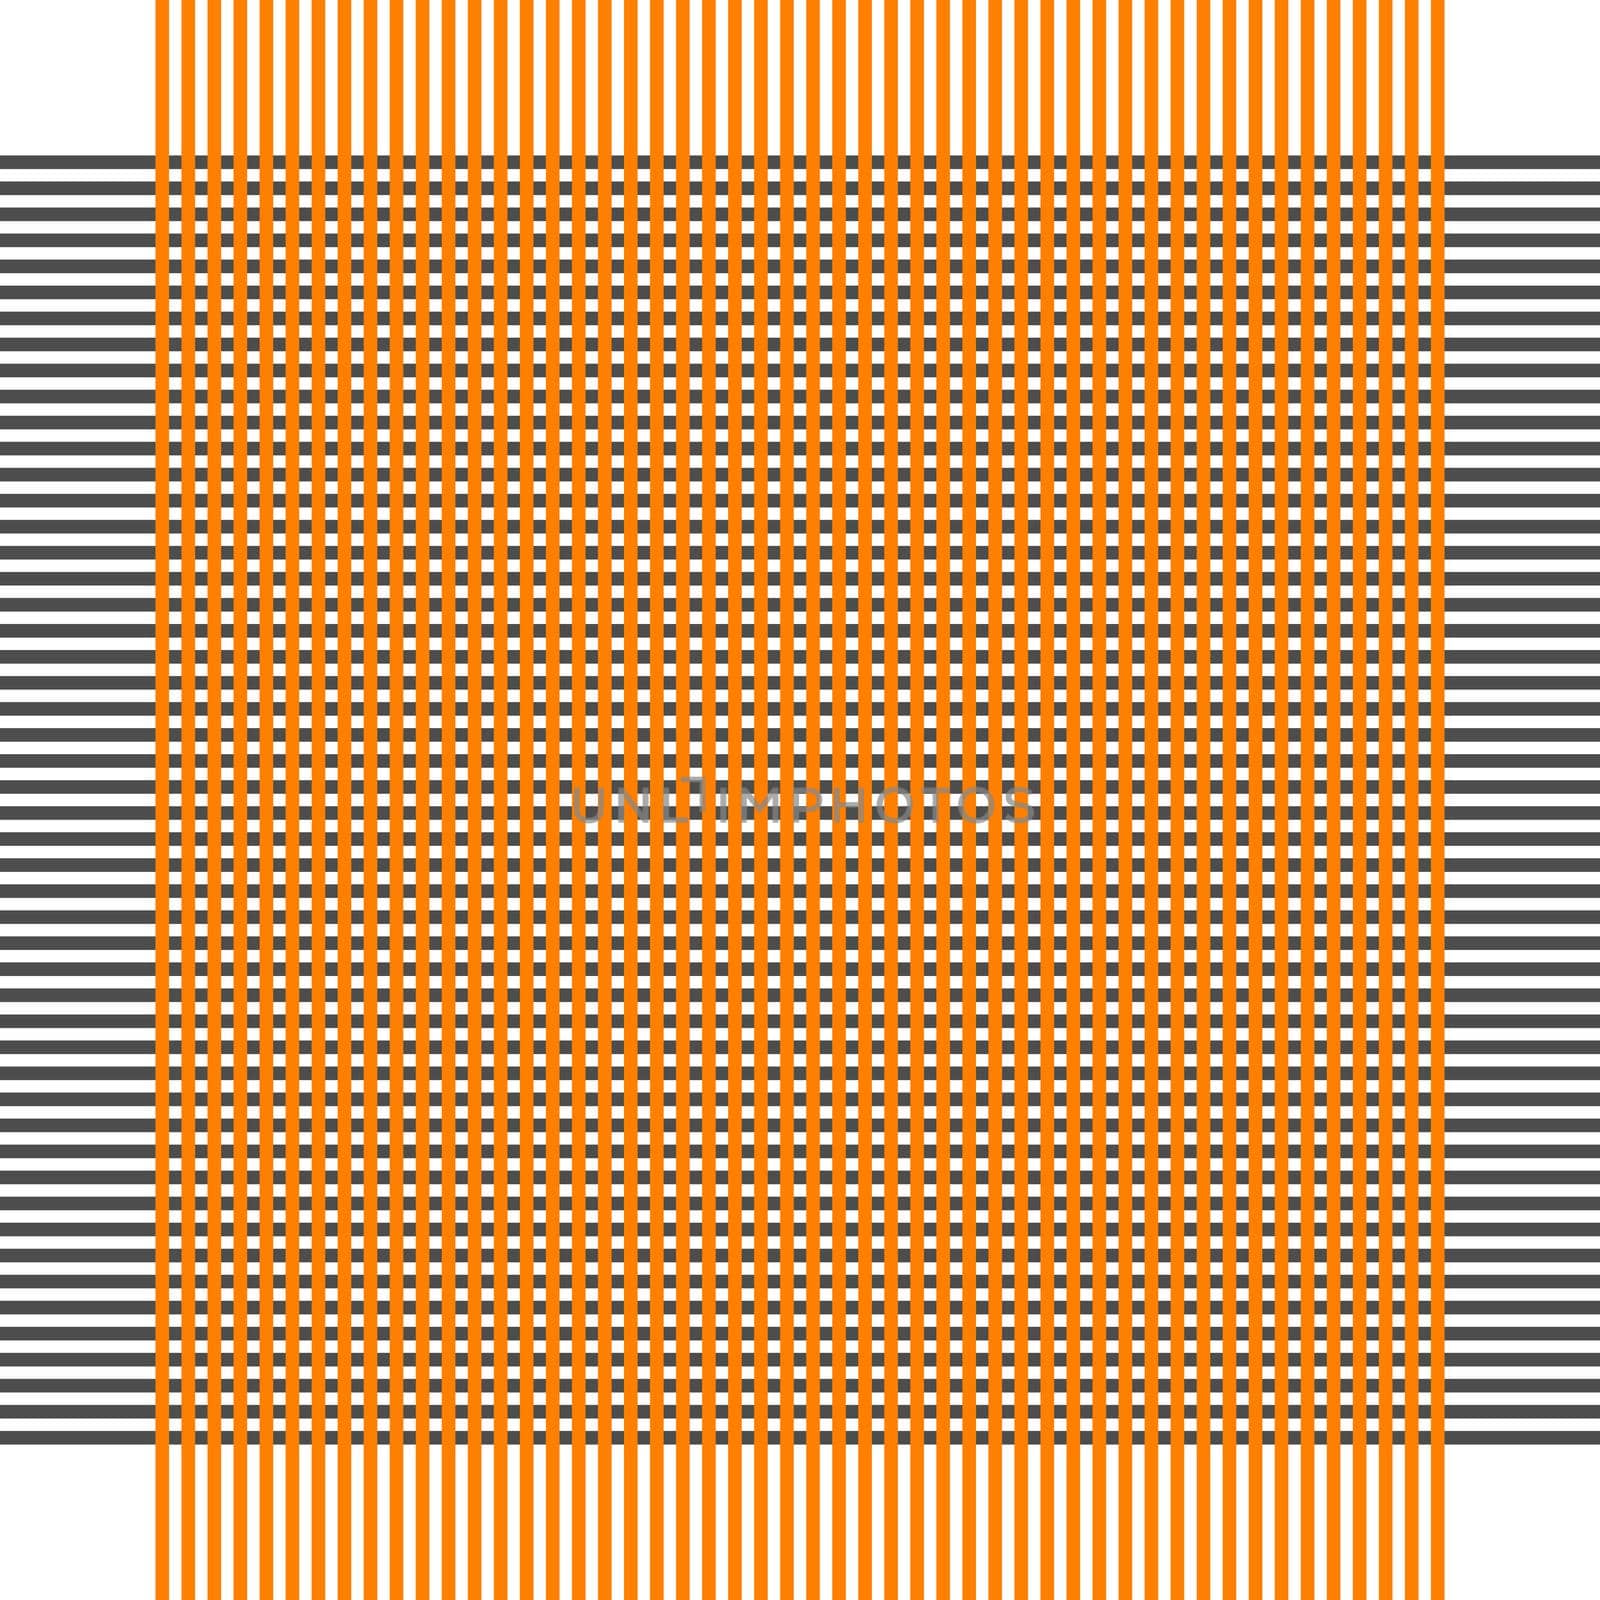 Overlapping of brown and gray stripes on a white background